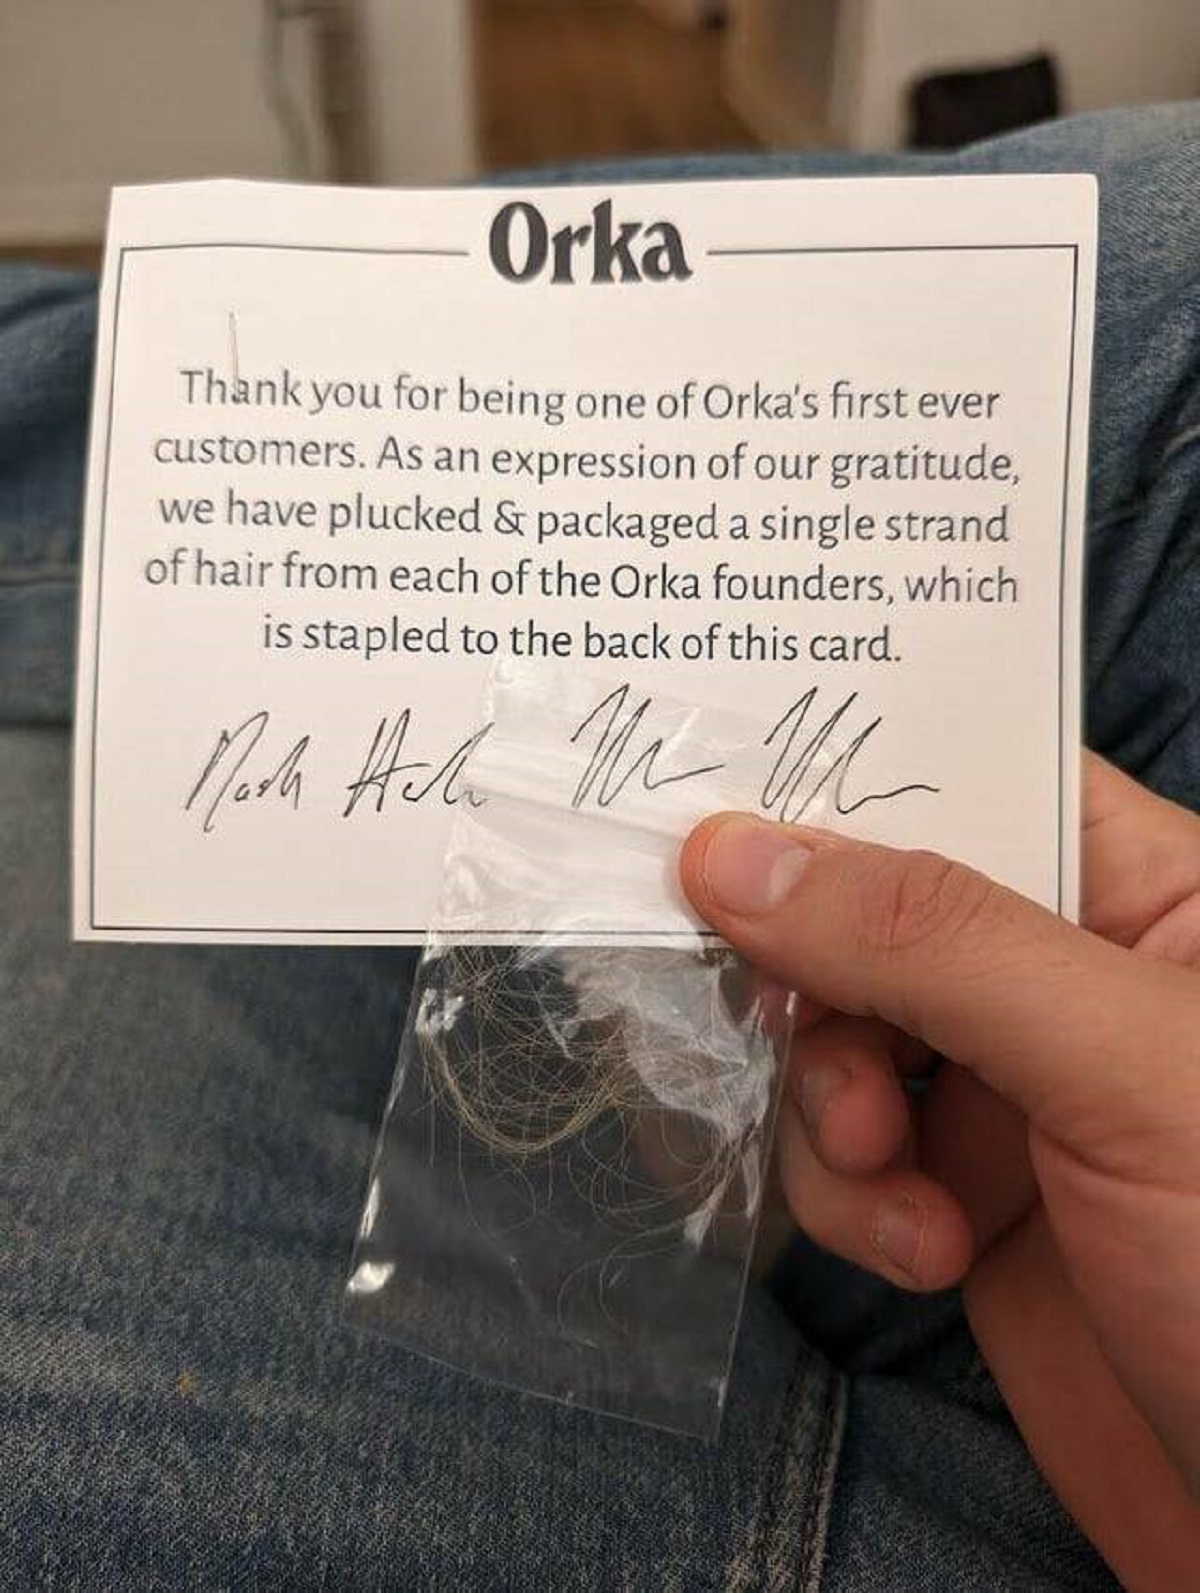 Orka Thank you for being one of Orka's first ever customers. As an expression of our gratitude, we have plucked & packaged a single strand of hair from each of the Orka founders, which is stapled to the back of this card. Moch Hall Me M